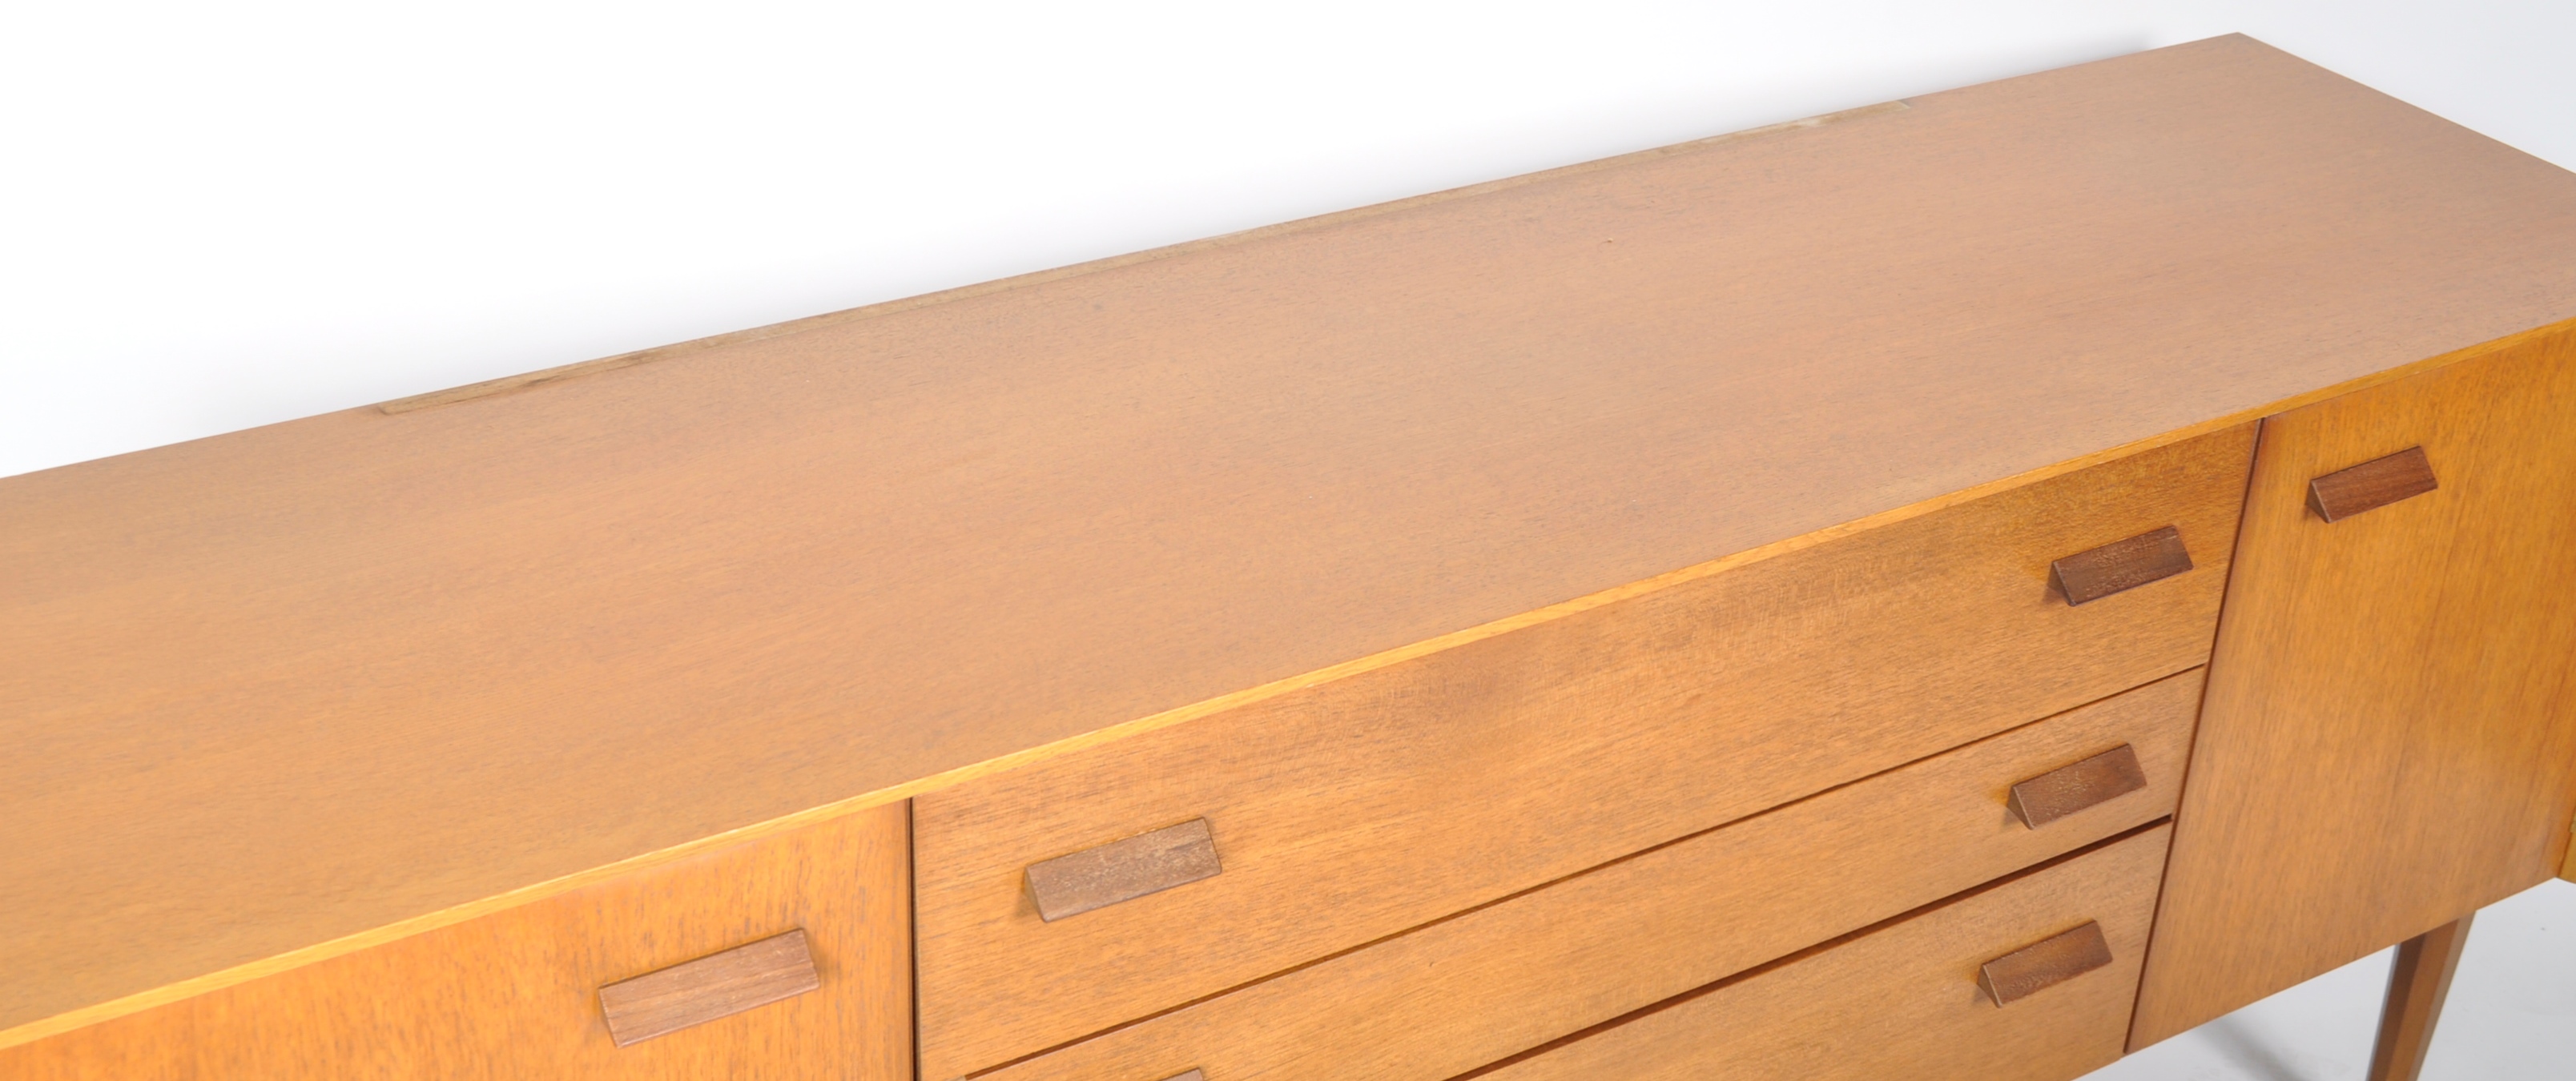 RICHARD YOUNG FOR G PLAN - MID CENTURY TEAK SIDEBOARD - Image 3 of 6